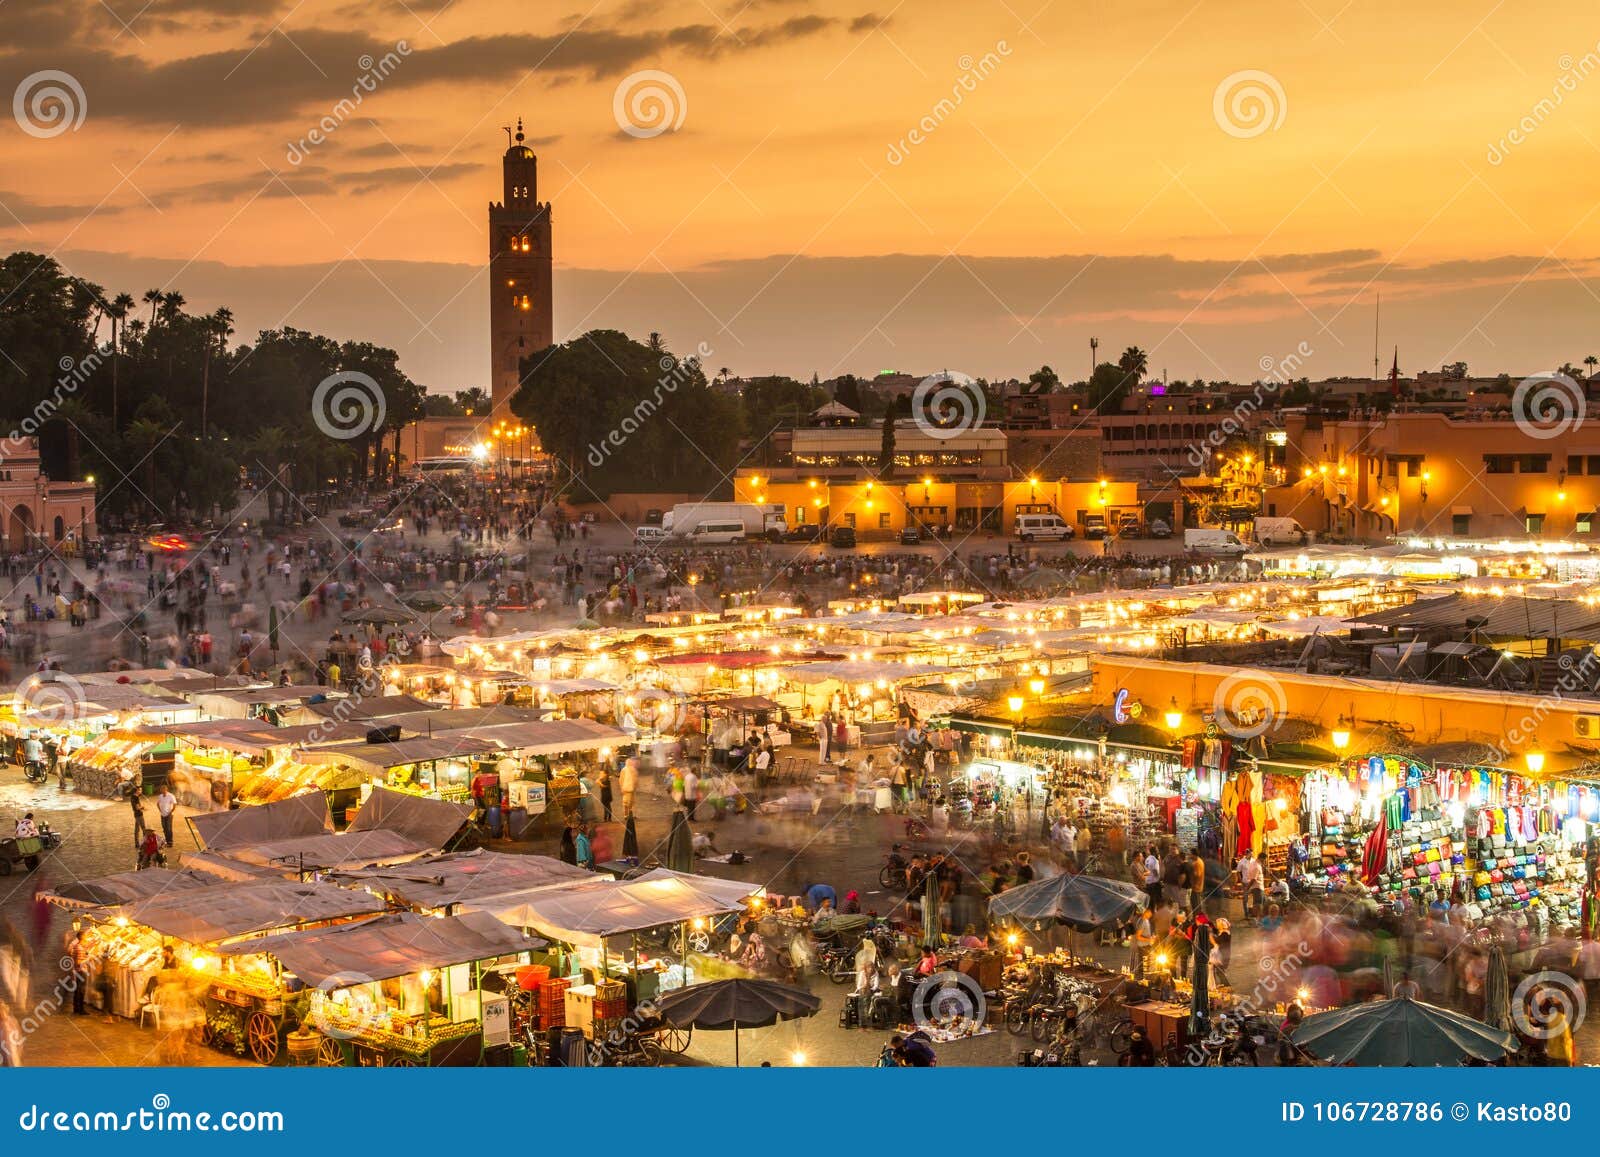 jamaa el fna market square in sunset, marrakesh, morocco, north africa.